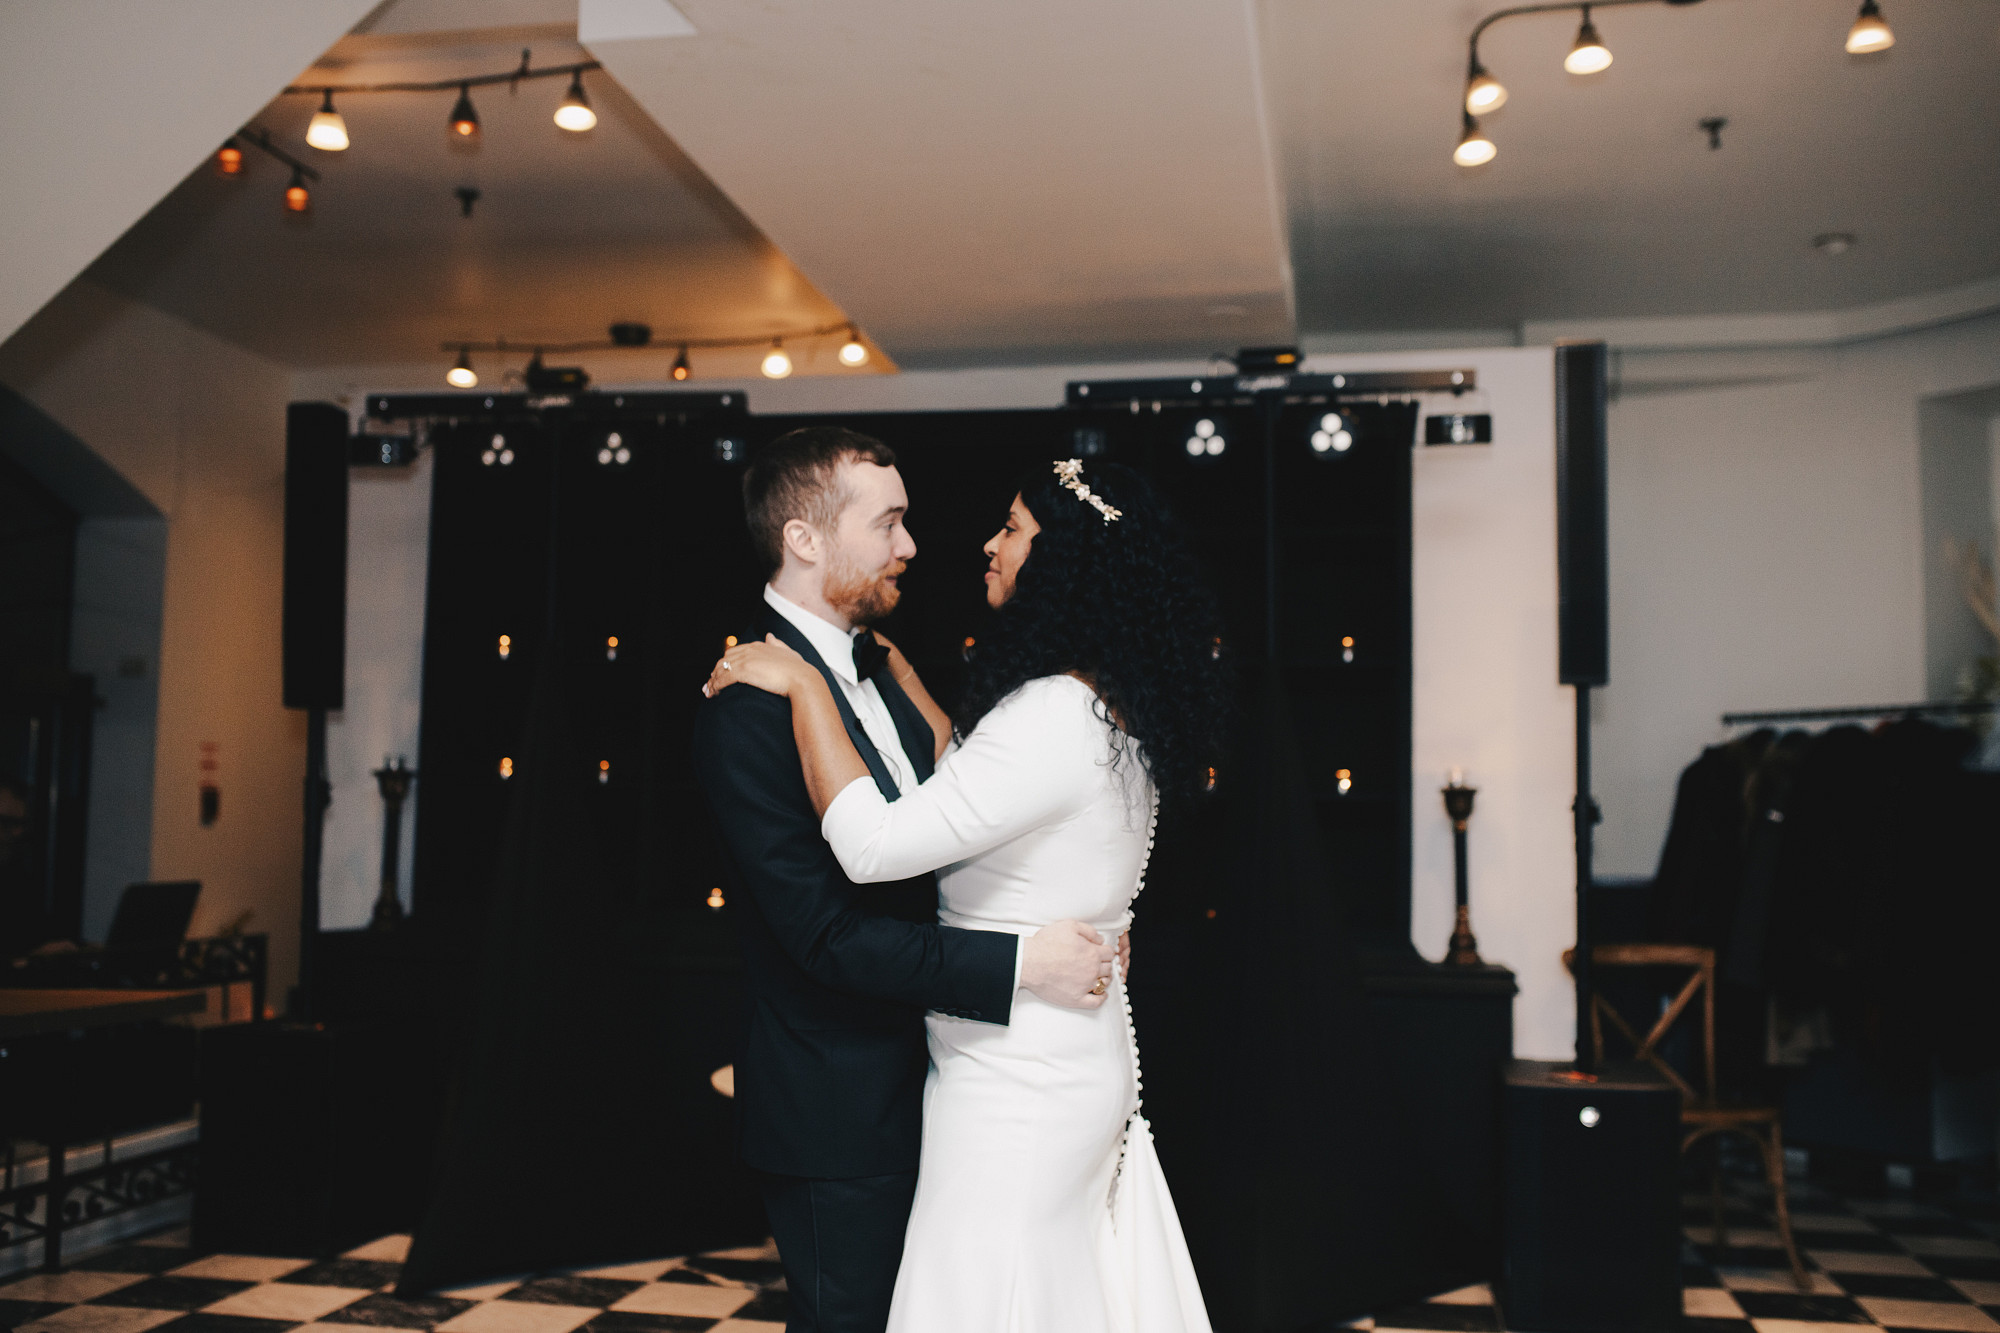 First dance photos at La Maquette wedding